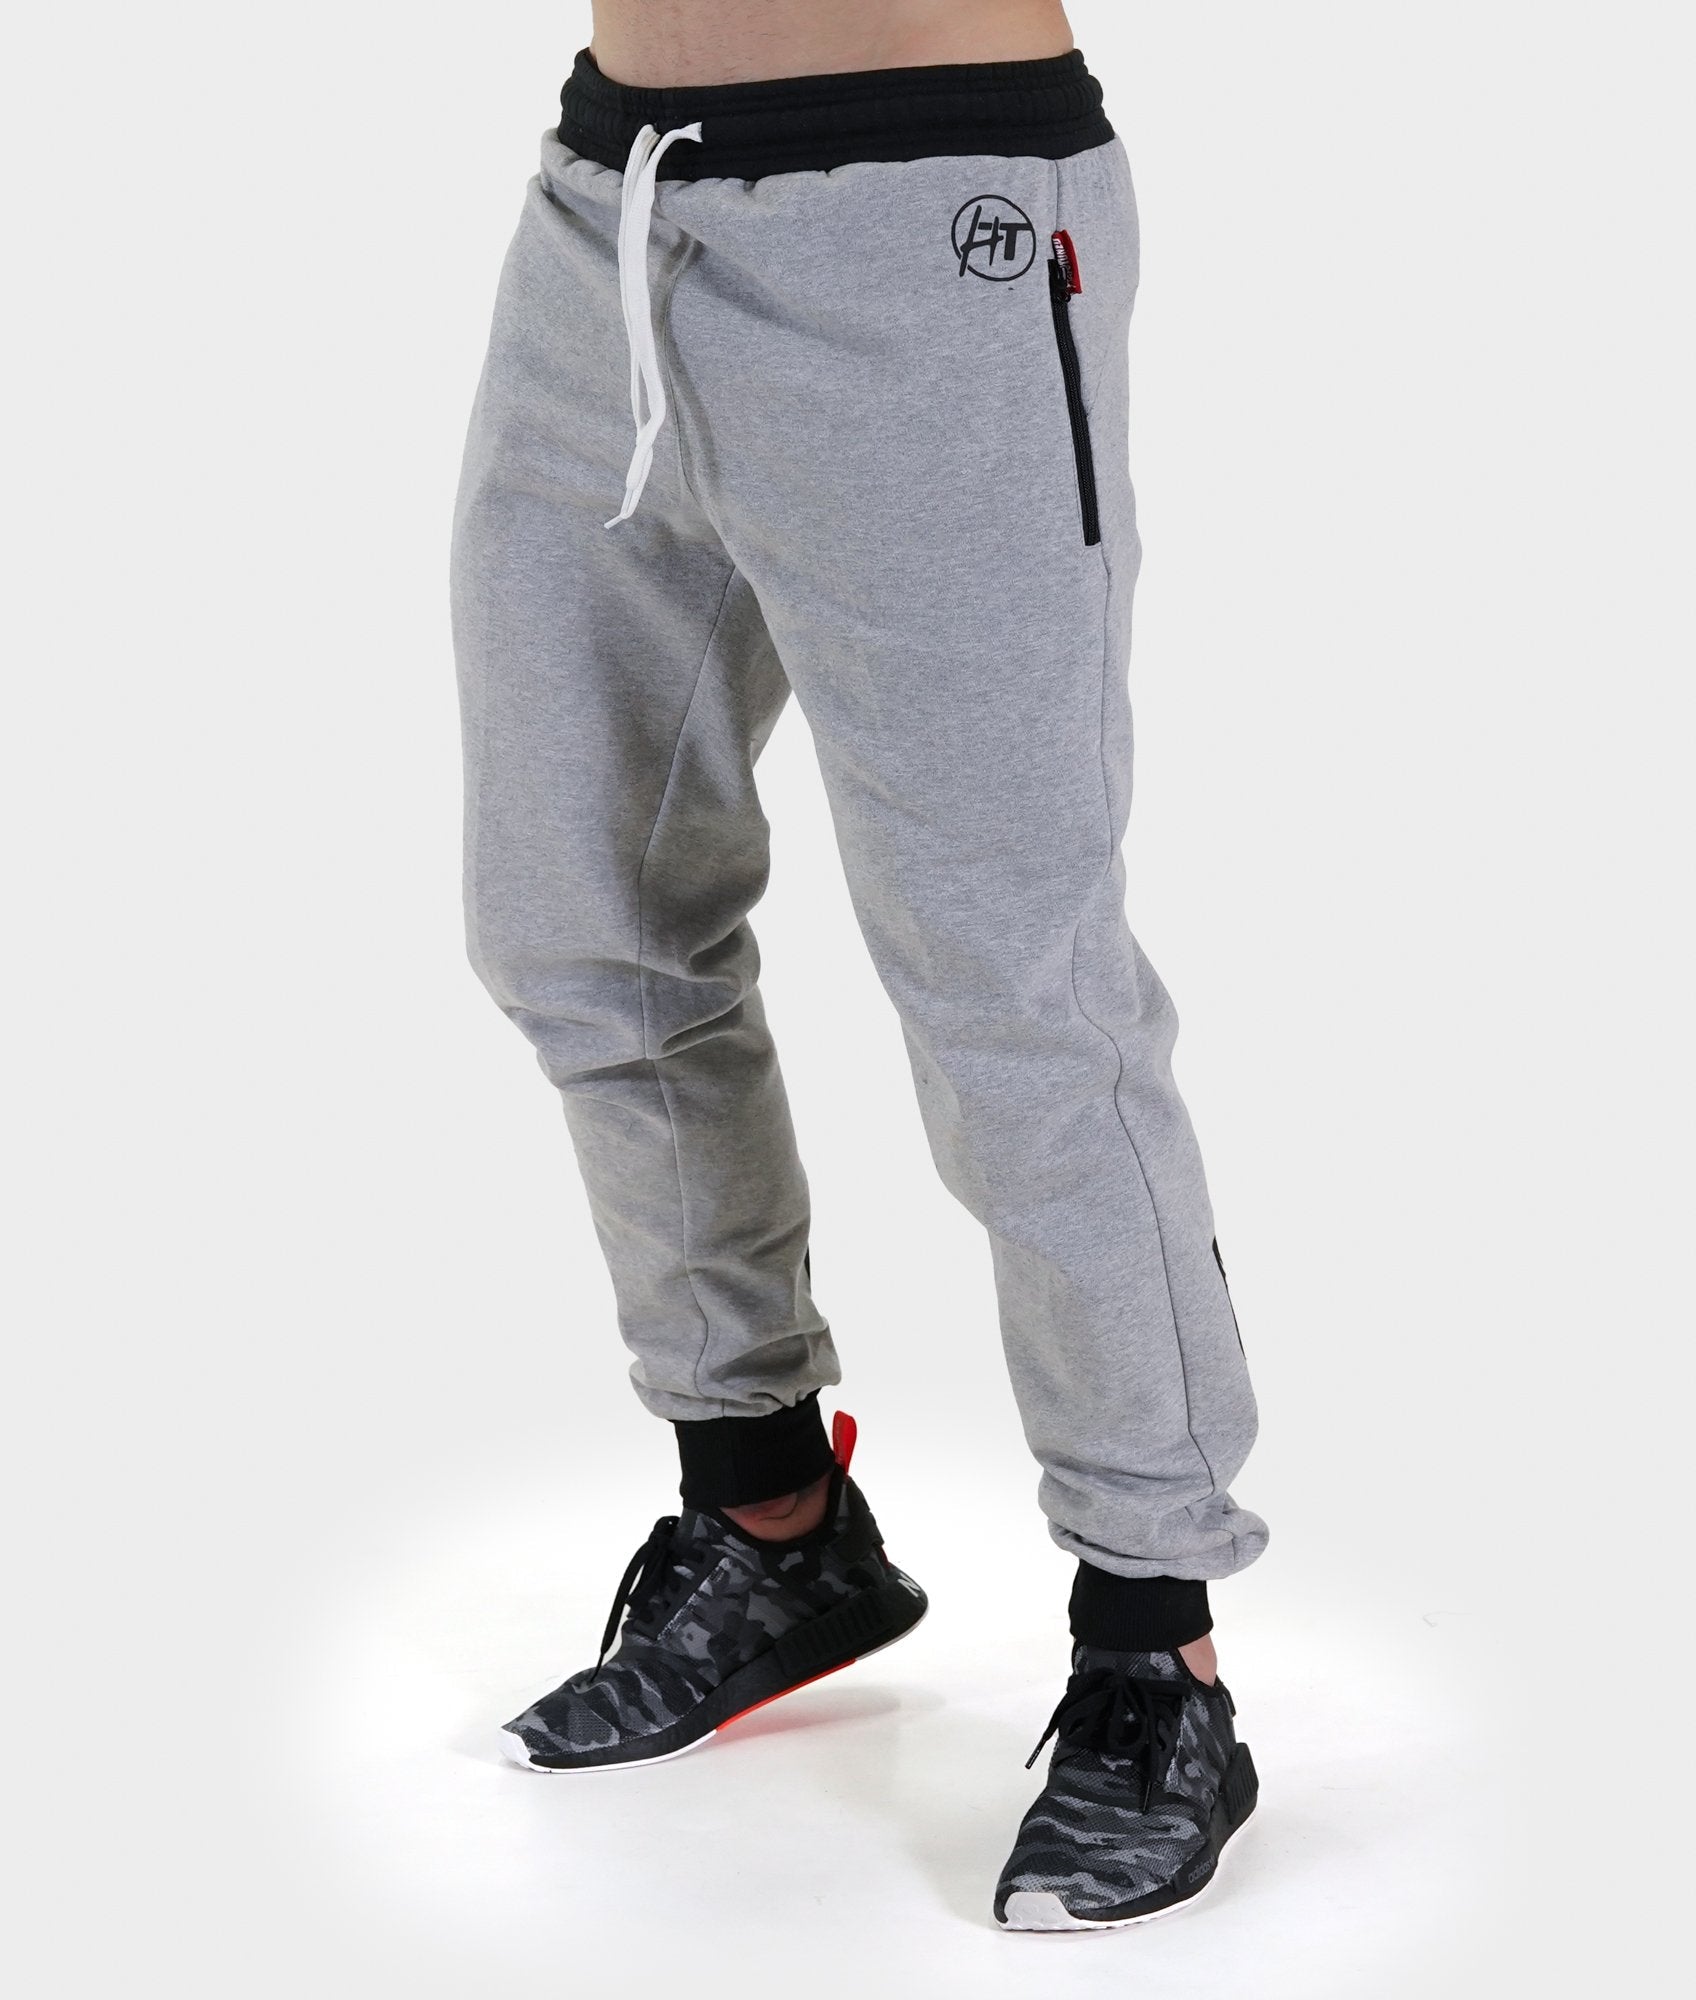 Mens Power Over Track Pants - Gray - Hardtuned